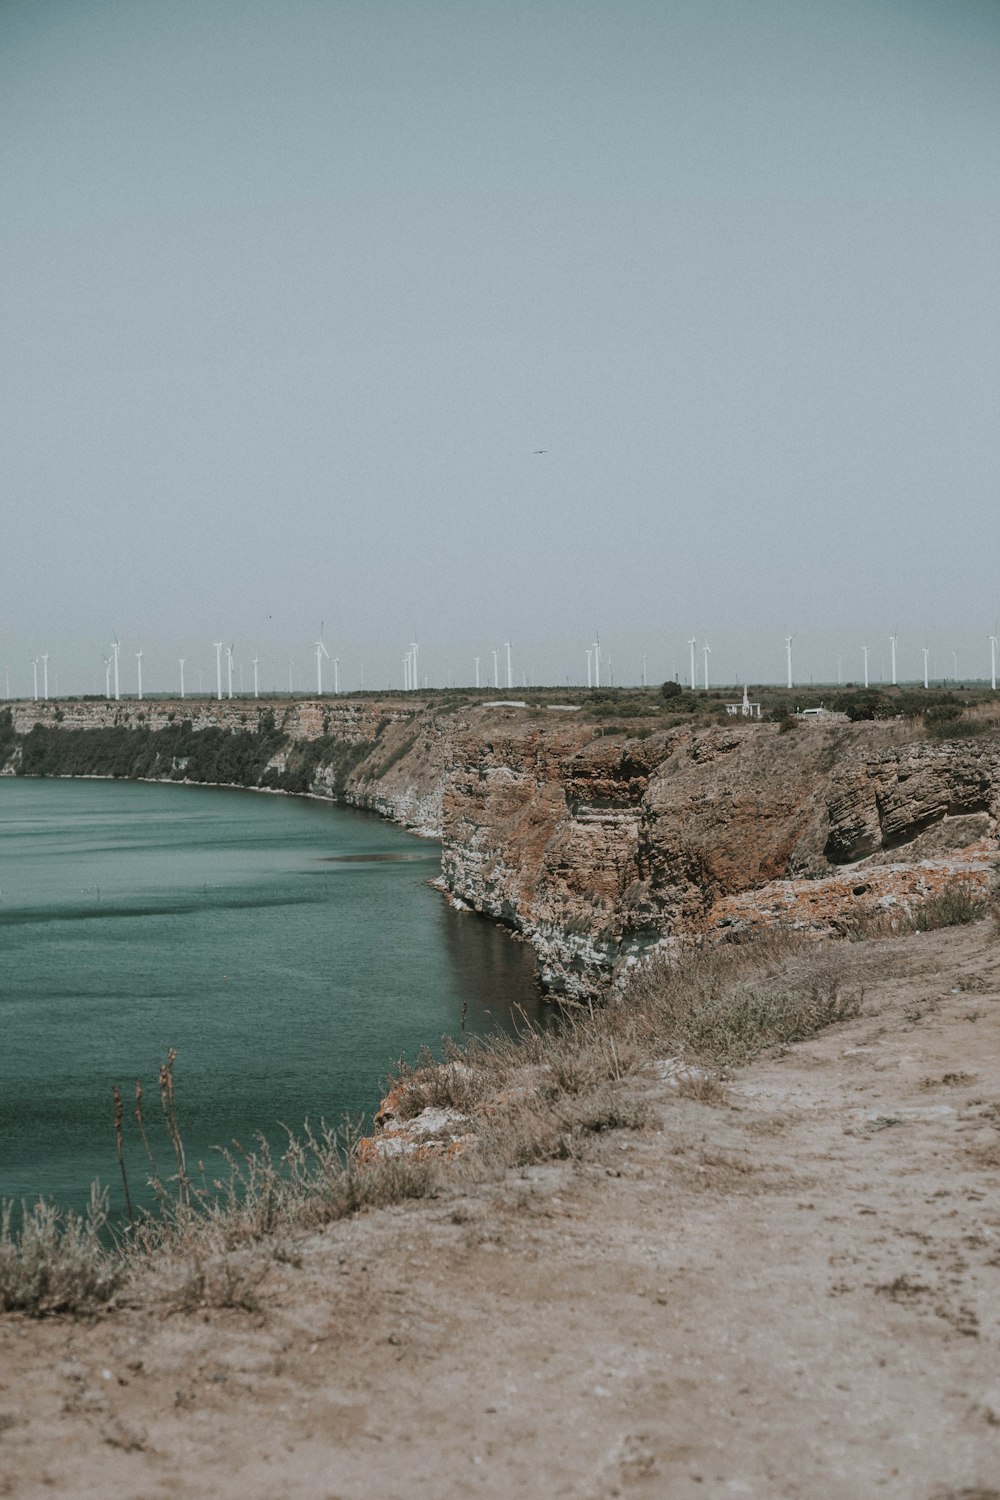 a beach with a body of water and a land with a row of wind turbines